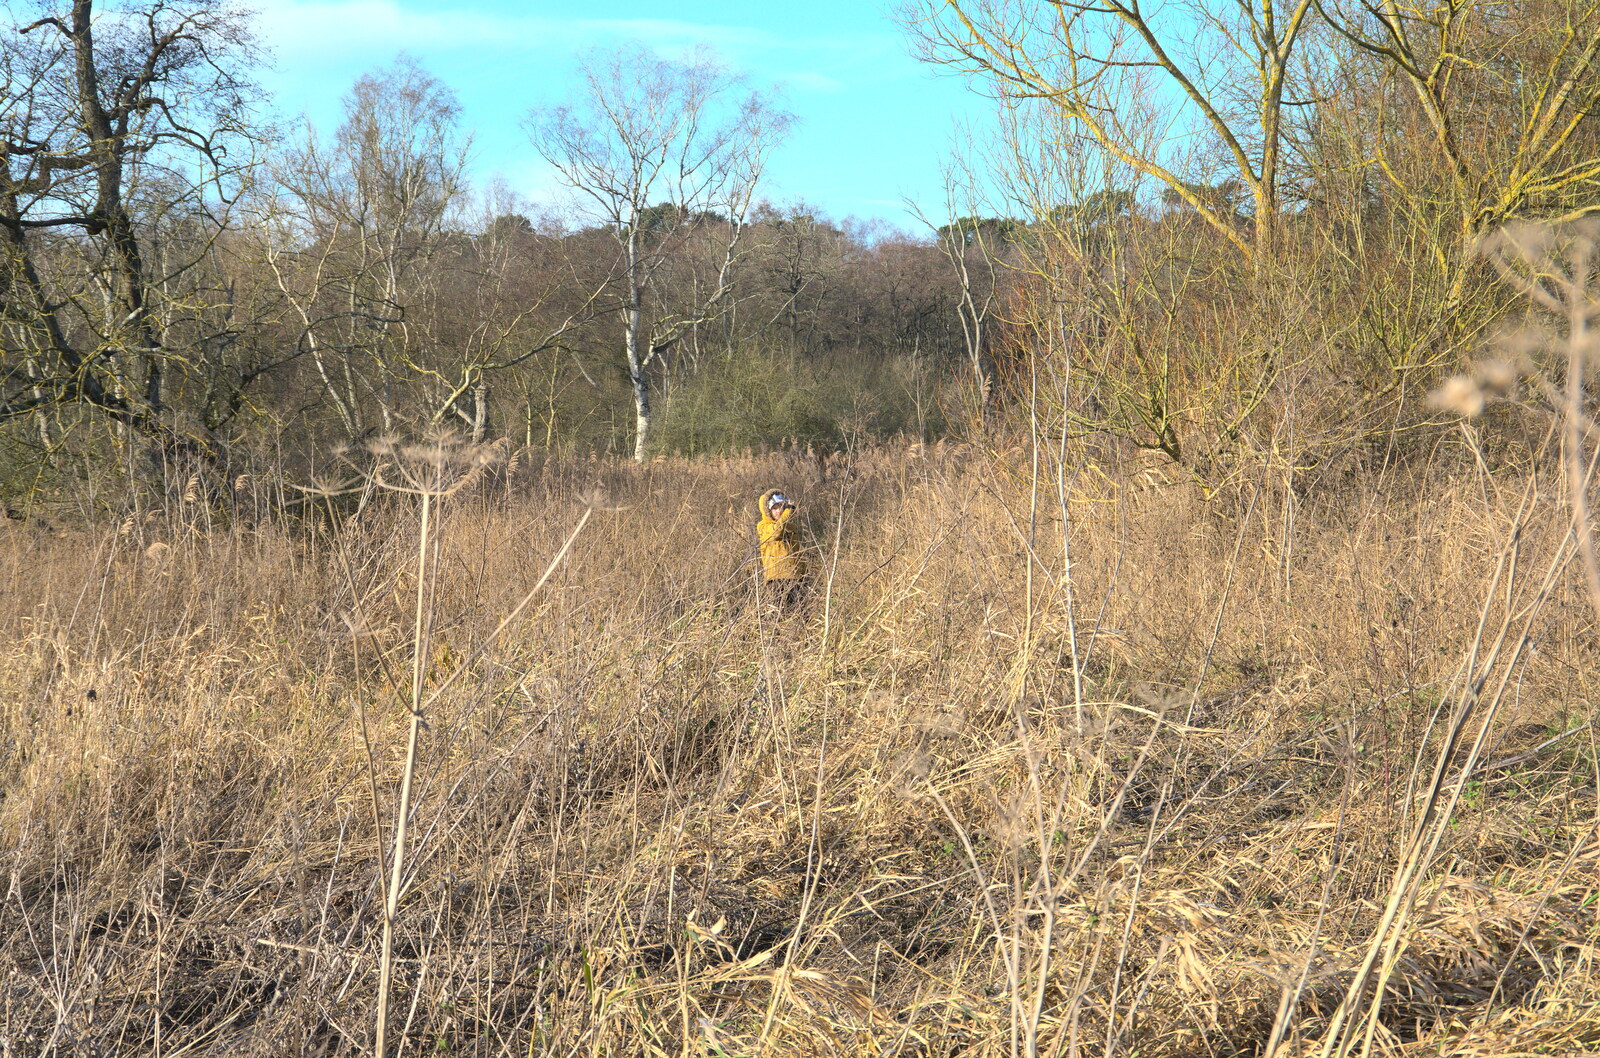 Harry's well camouflaged in the bushes from A Walk Around Knettishall Heath, Thetford, Norfolk - 2nd January 2022